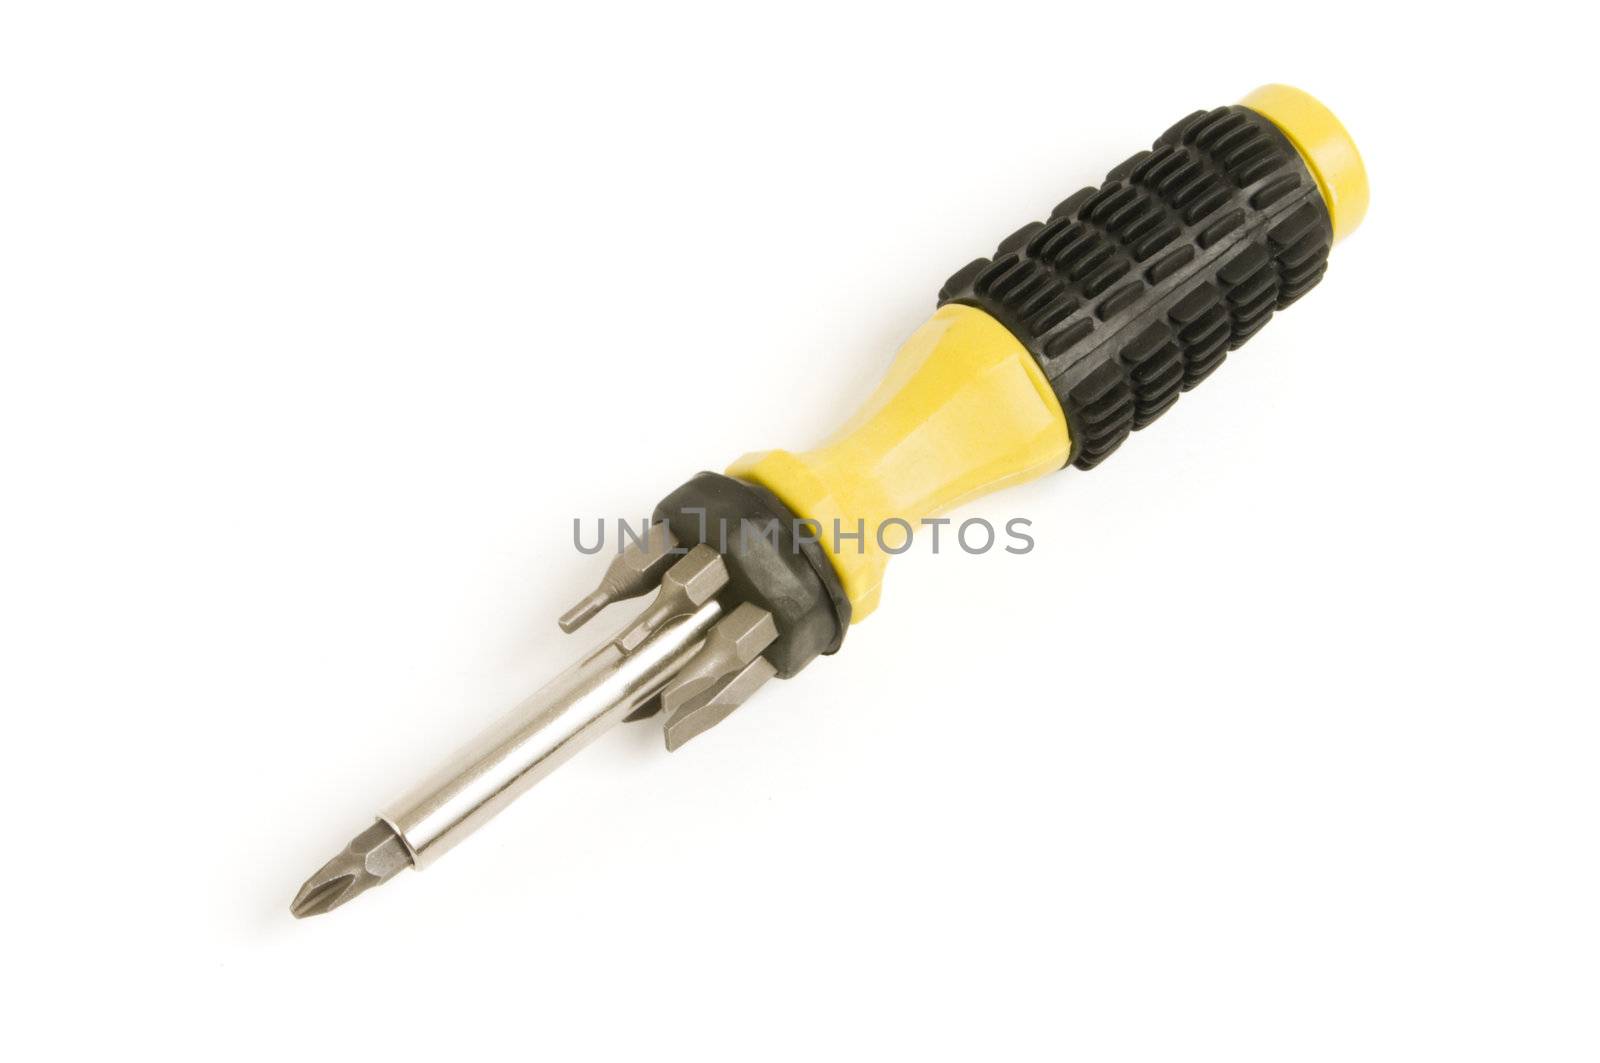 Multiple head screwdriver isolated on white background